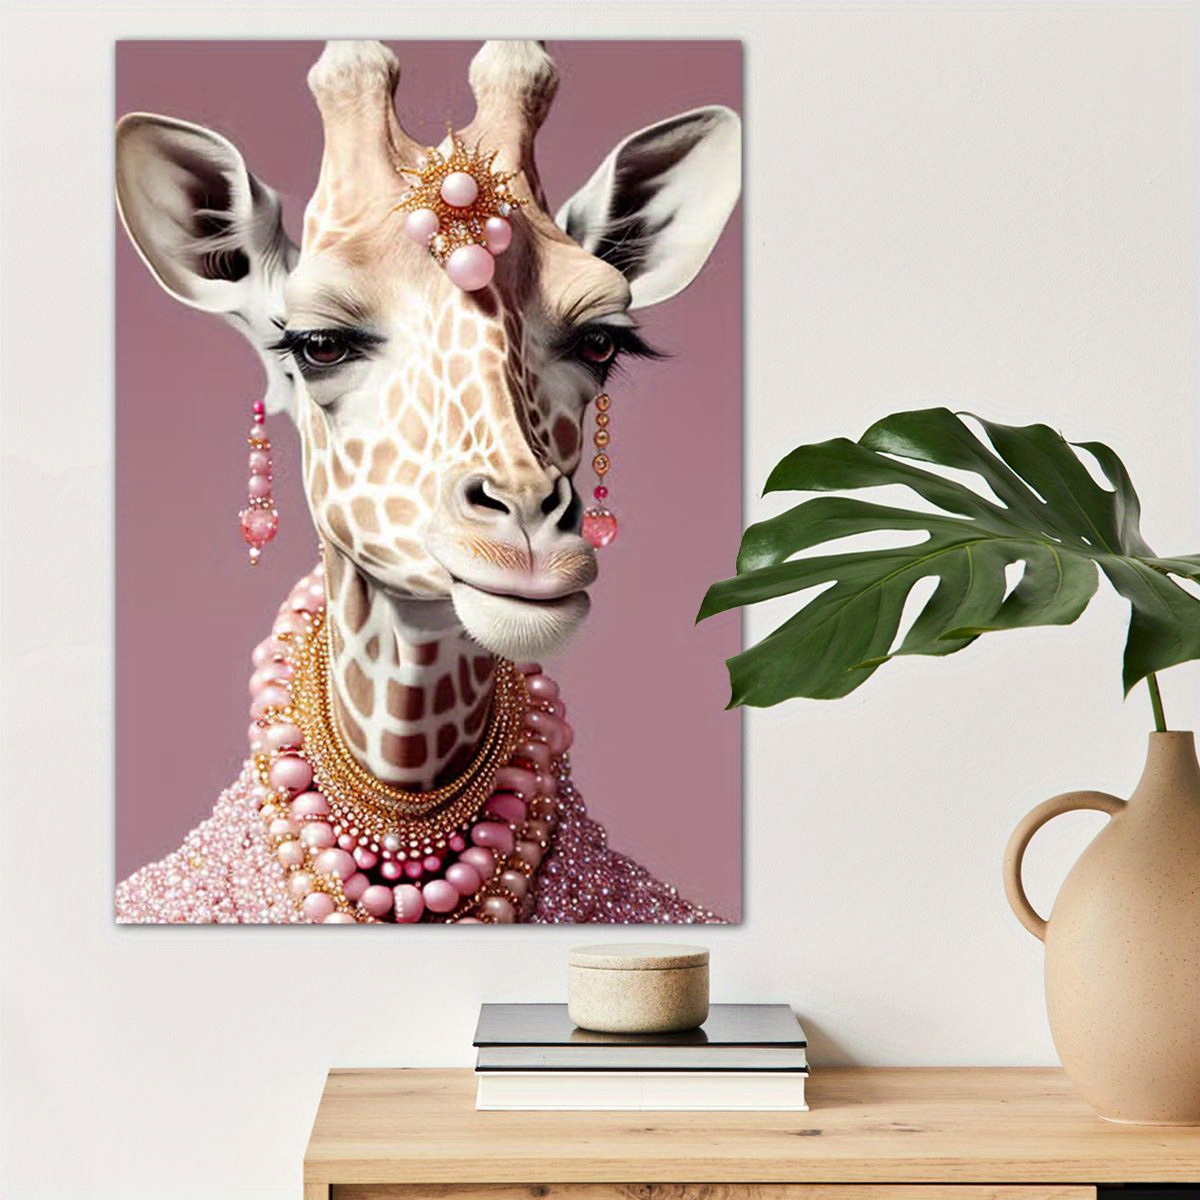 

1pc Fashion Giraffe Poster Canvas Wall Art For Home Decor, Animal Lovers Poster Wall Decor High Quality Canvas Prints For Living Room Bedroom Kitchen Office Cafe Decor, Perfect Gift And Decoration